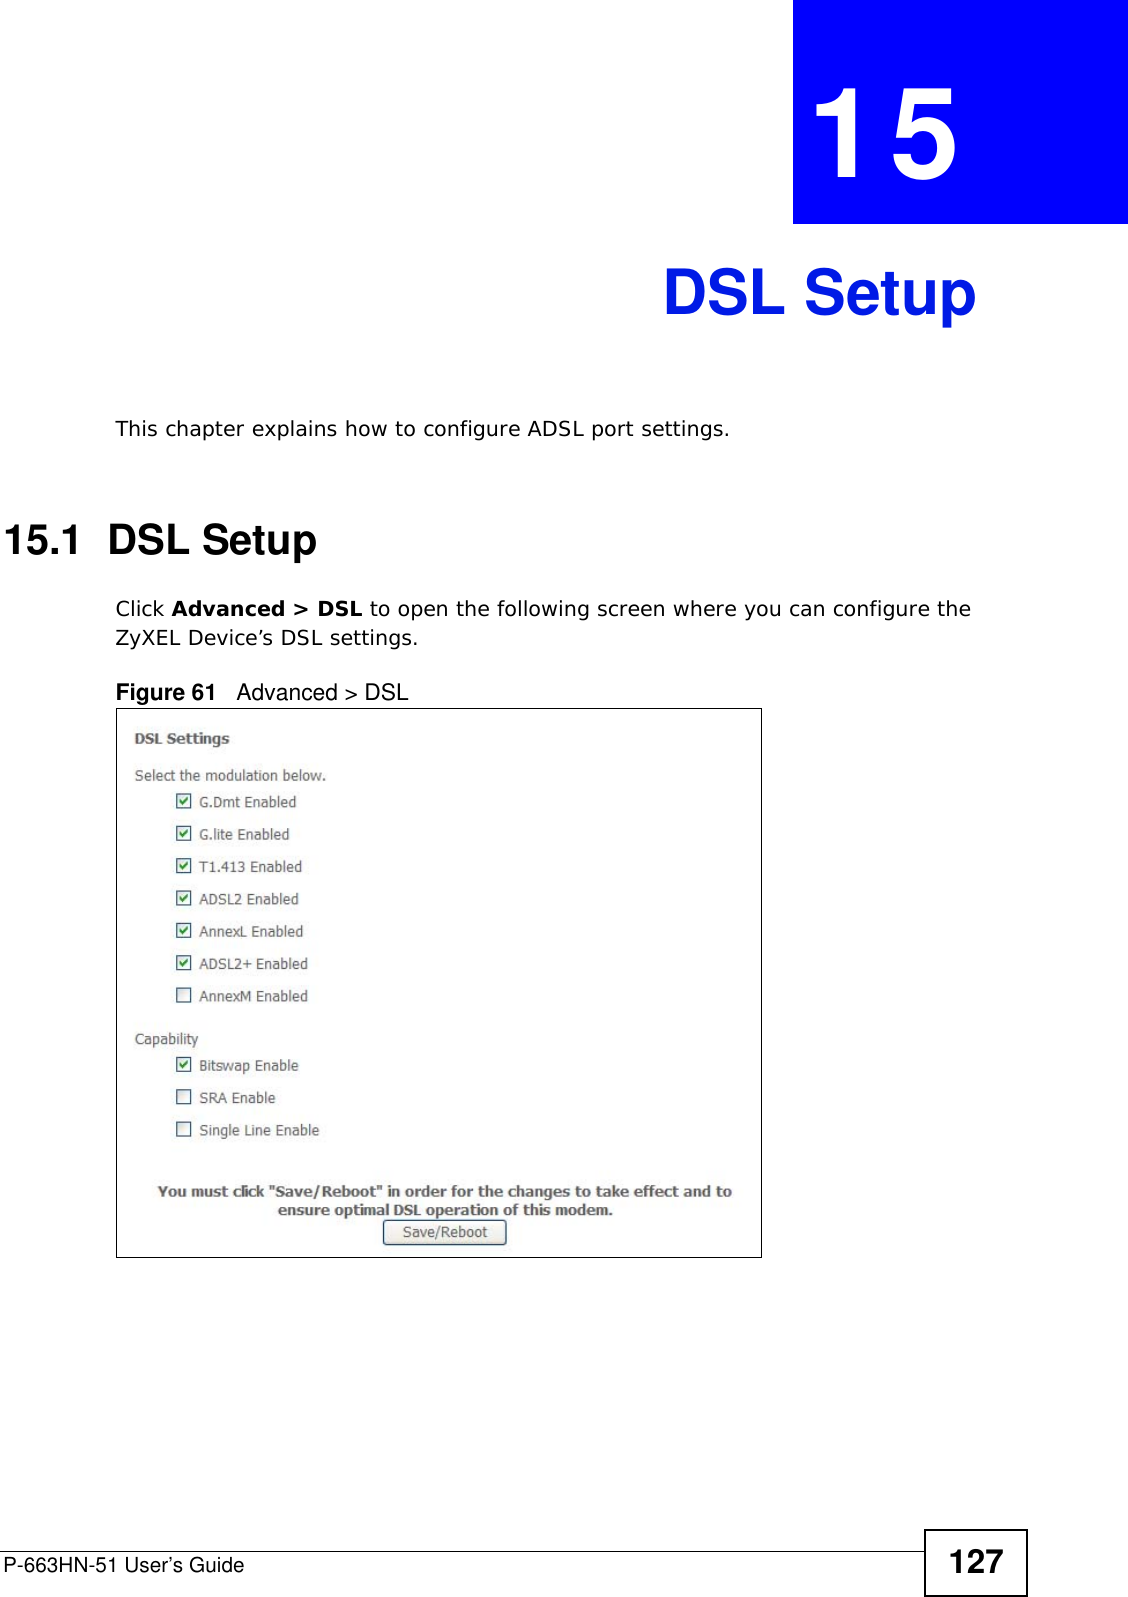 P-663HN-51 User’s Guide 127CHAPTER  15 DSL SetupThis chapter explains how to configure ADSL port settings.15.1  DSL Setup Click Advanced &gt; DSL to open the following screen where you can configure the ZyXEL Device’s DSL settings.Figure 61   Advanced &gt; DSL 